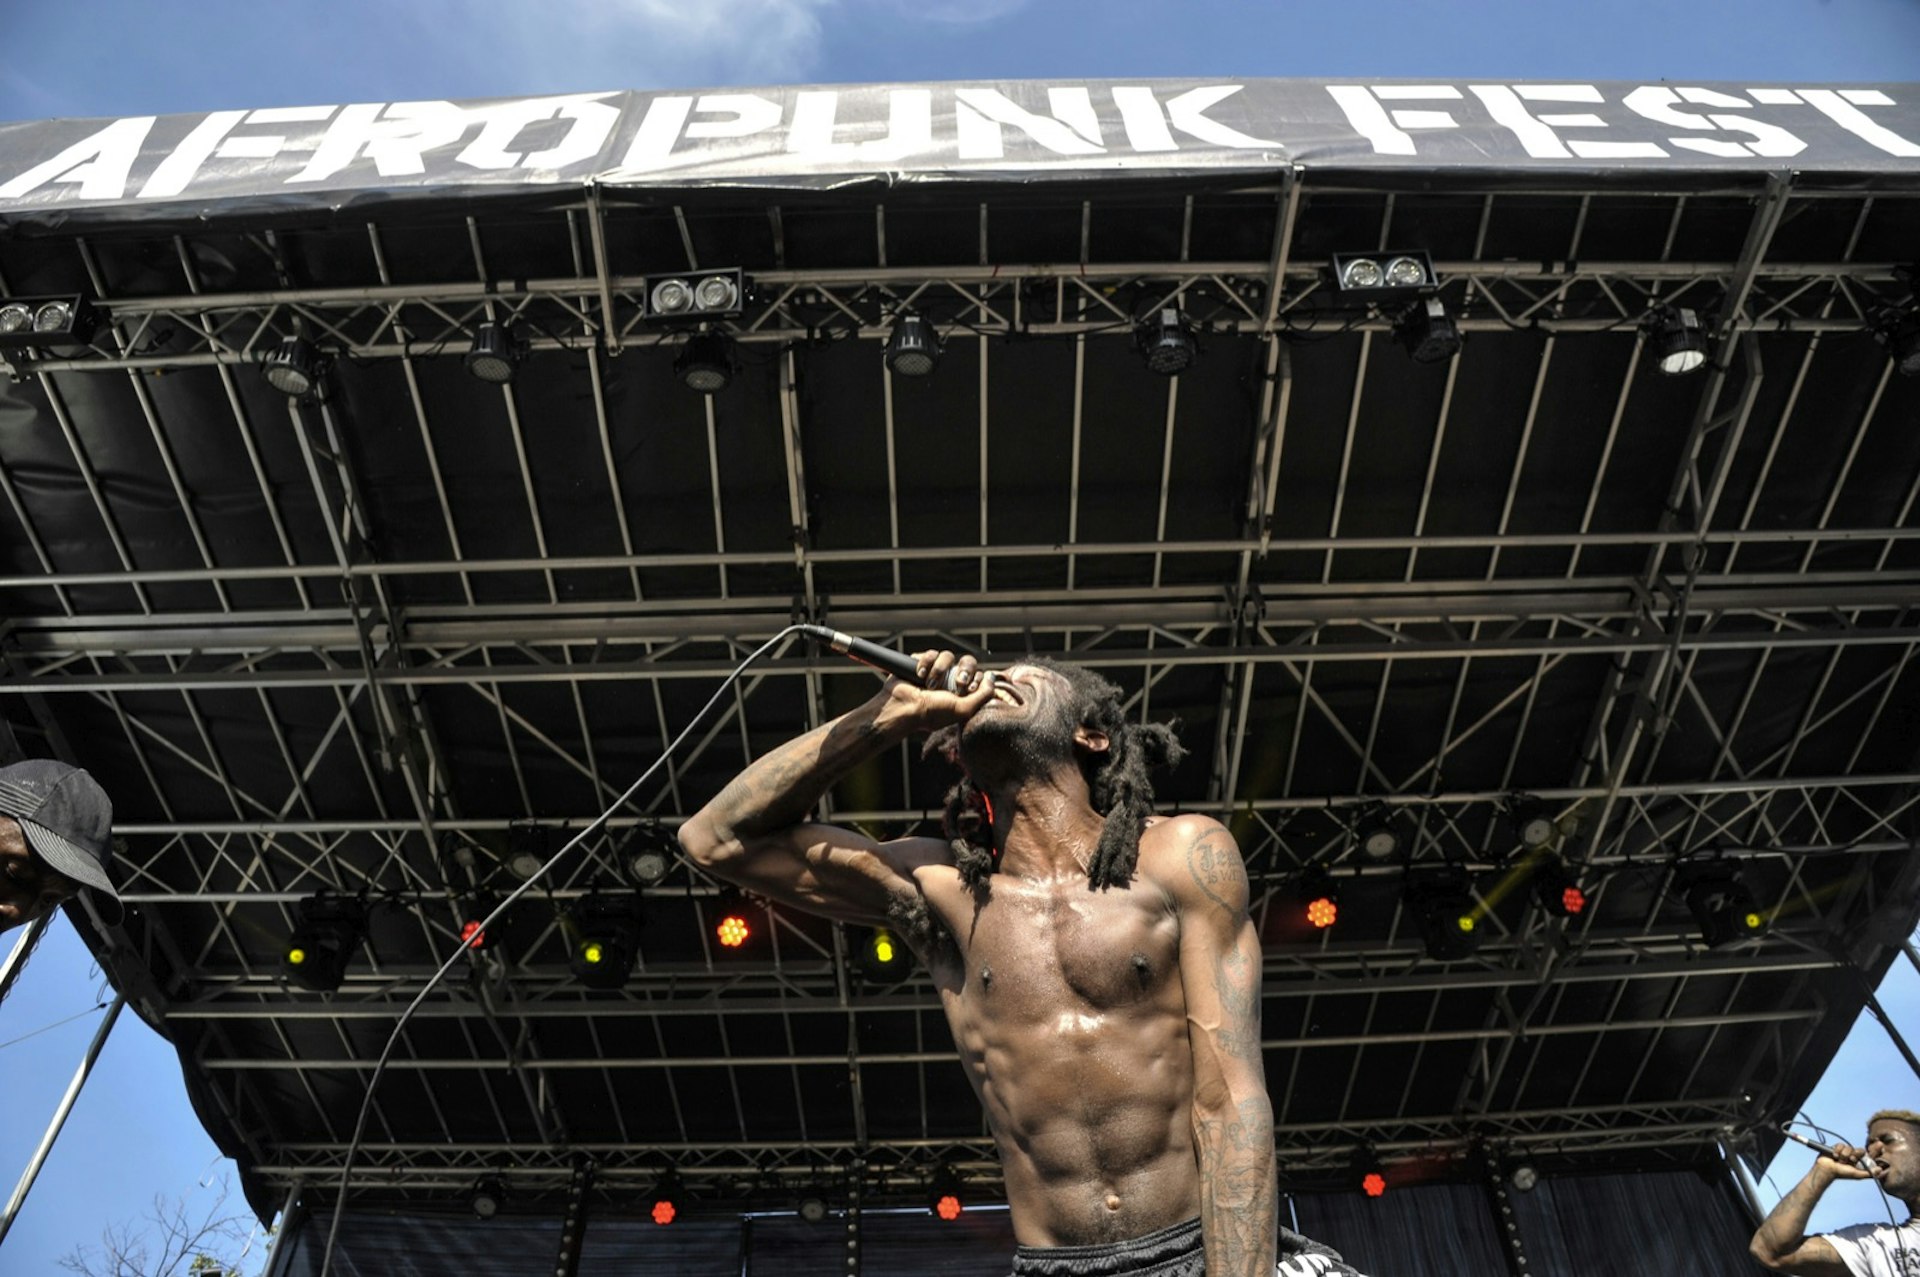 Photo taken from below a shirtless performer who screams into a microphone, leaning over the edge of a stage. Above him is a sign that says Afropunk fest. 